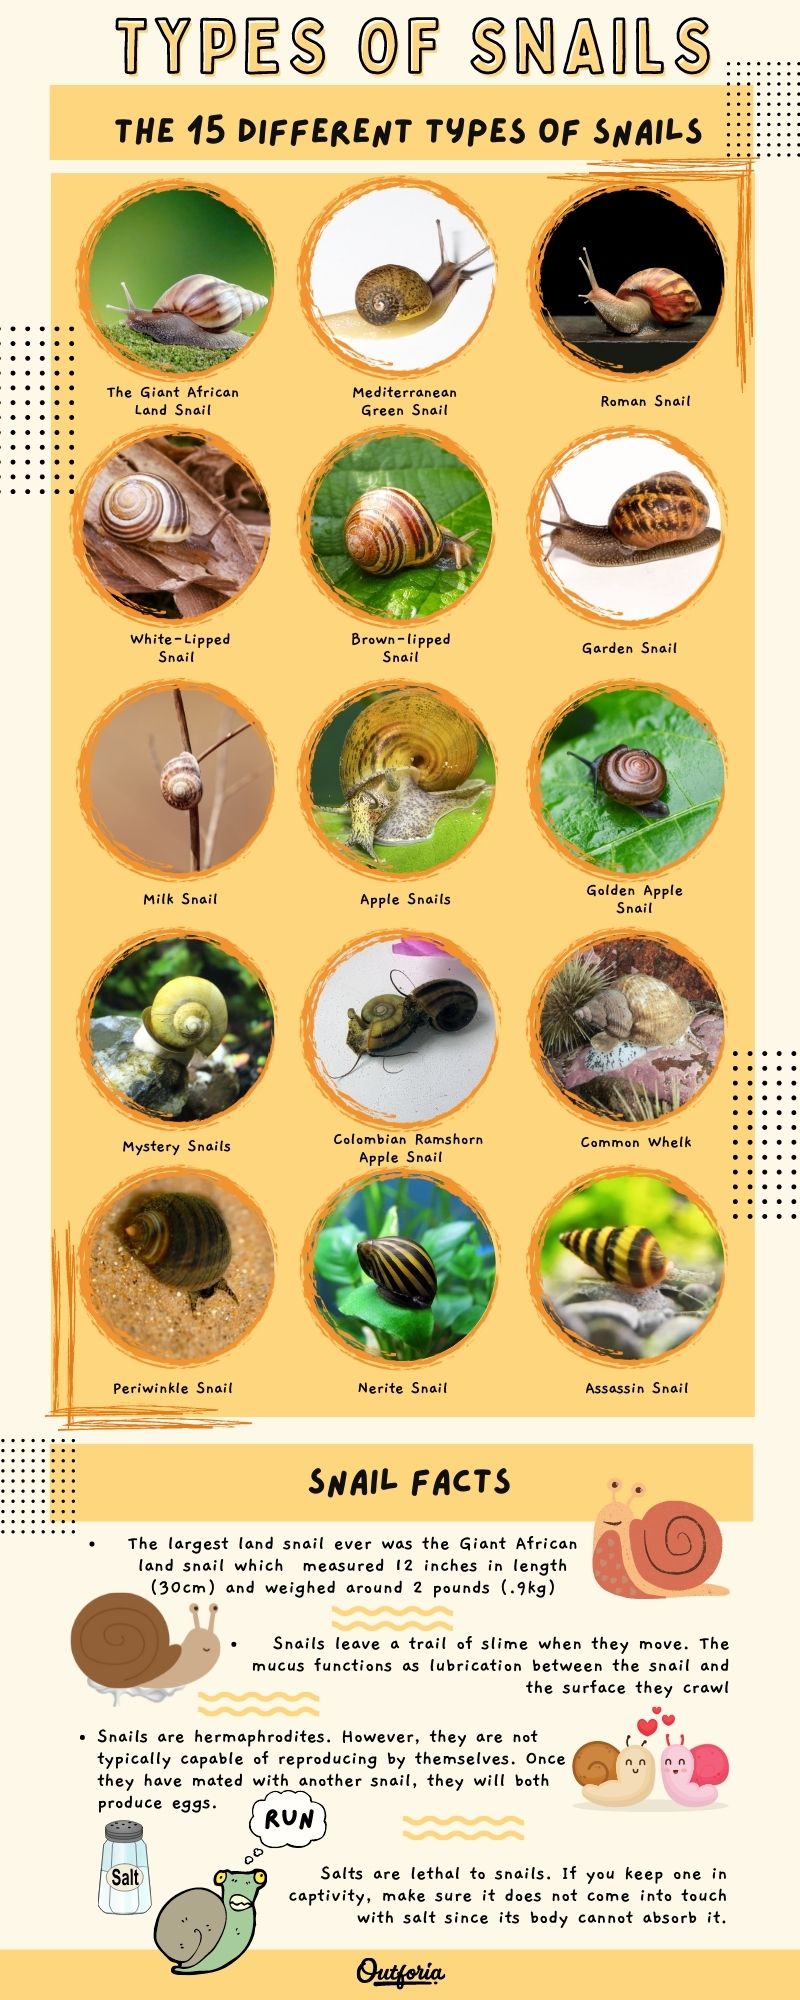 types of snails chart with images, names, and snail facts